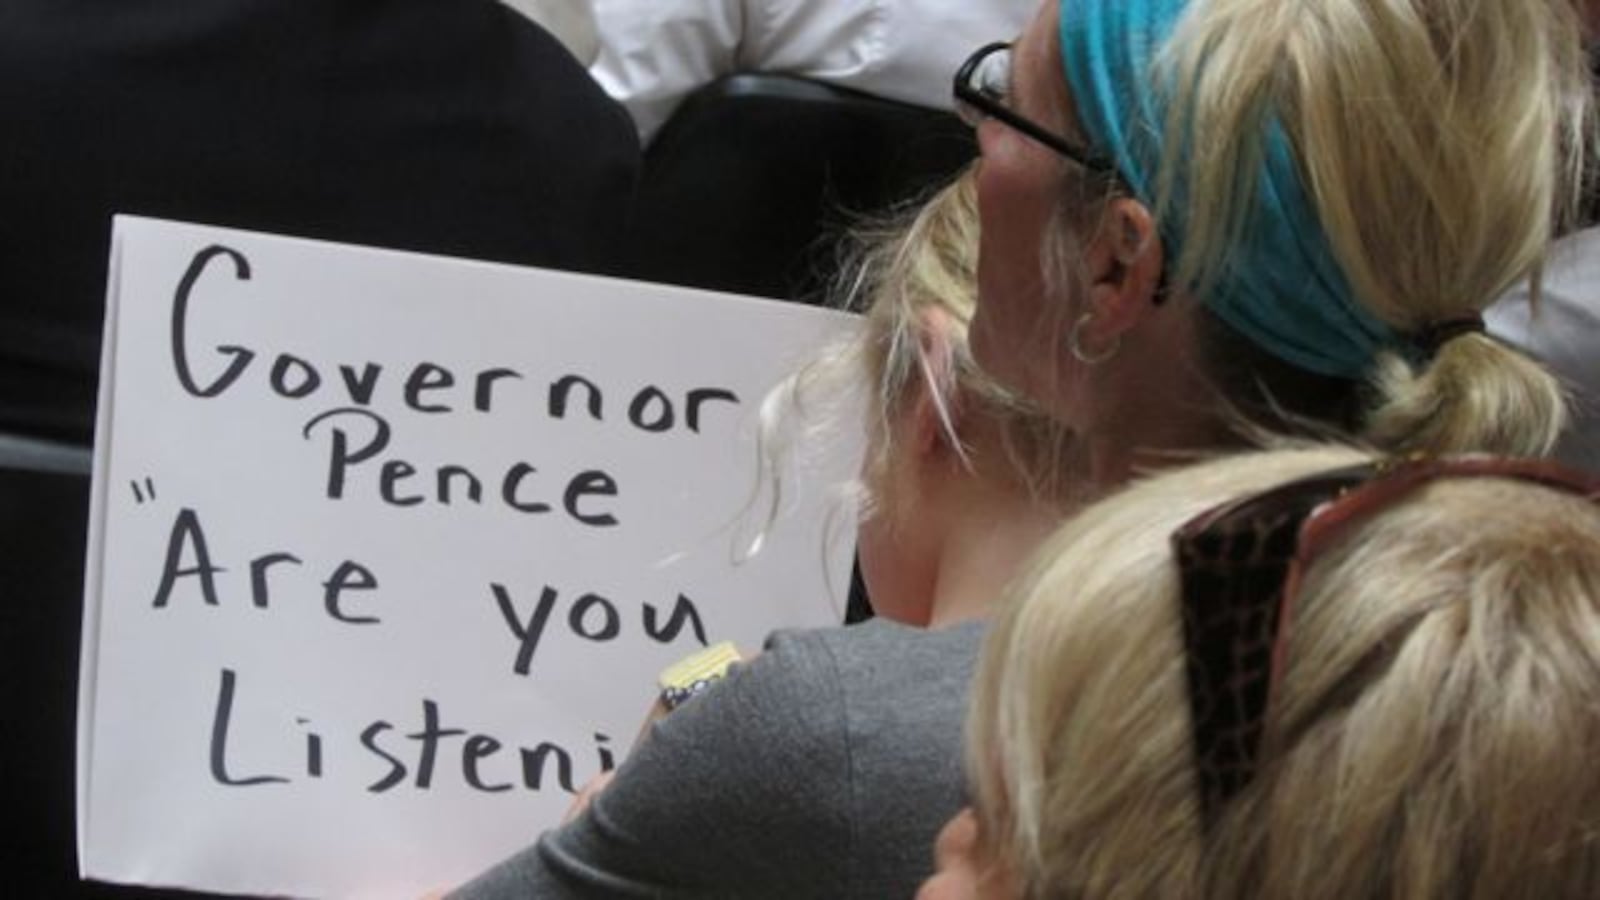 A statehouse rally before the Education Roundtable meeting against Indiana's proposed standards targeted Gov. Mike Pence, asking if he was listening to their concerns. (Scott Elliott)